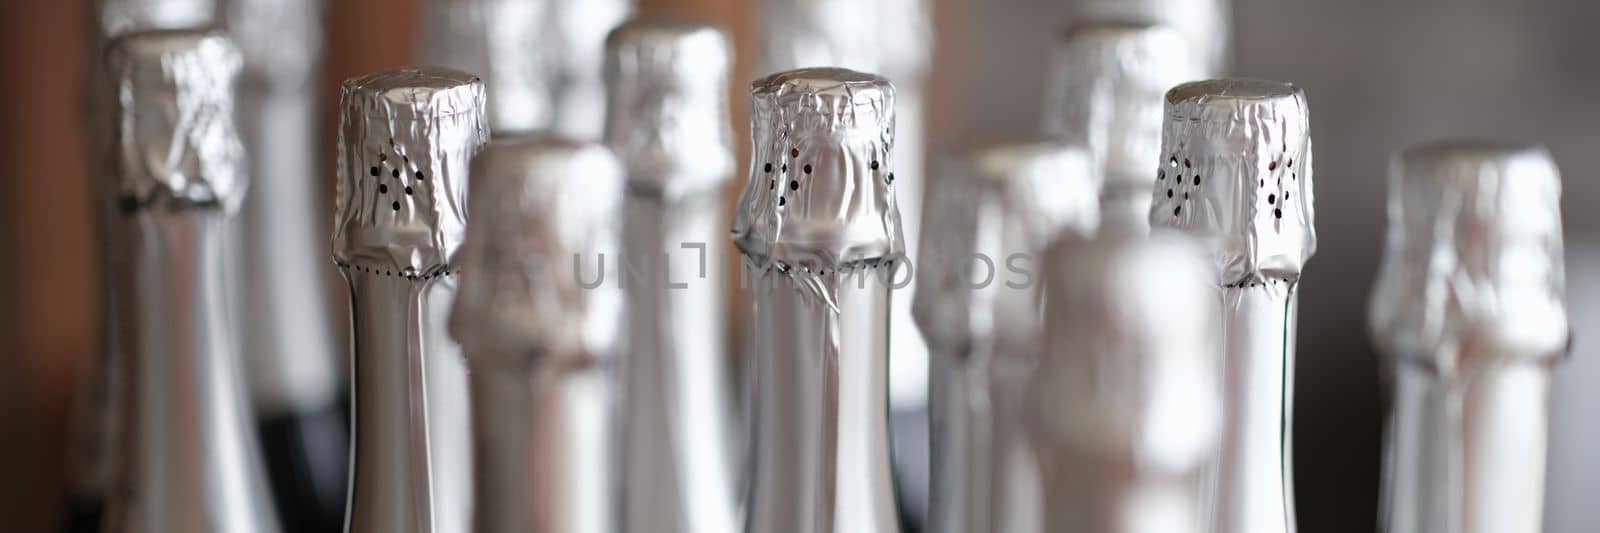 Bottles of champagne are on display in restaurant. Selection of high-quality elite champagne concept